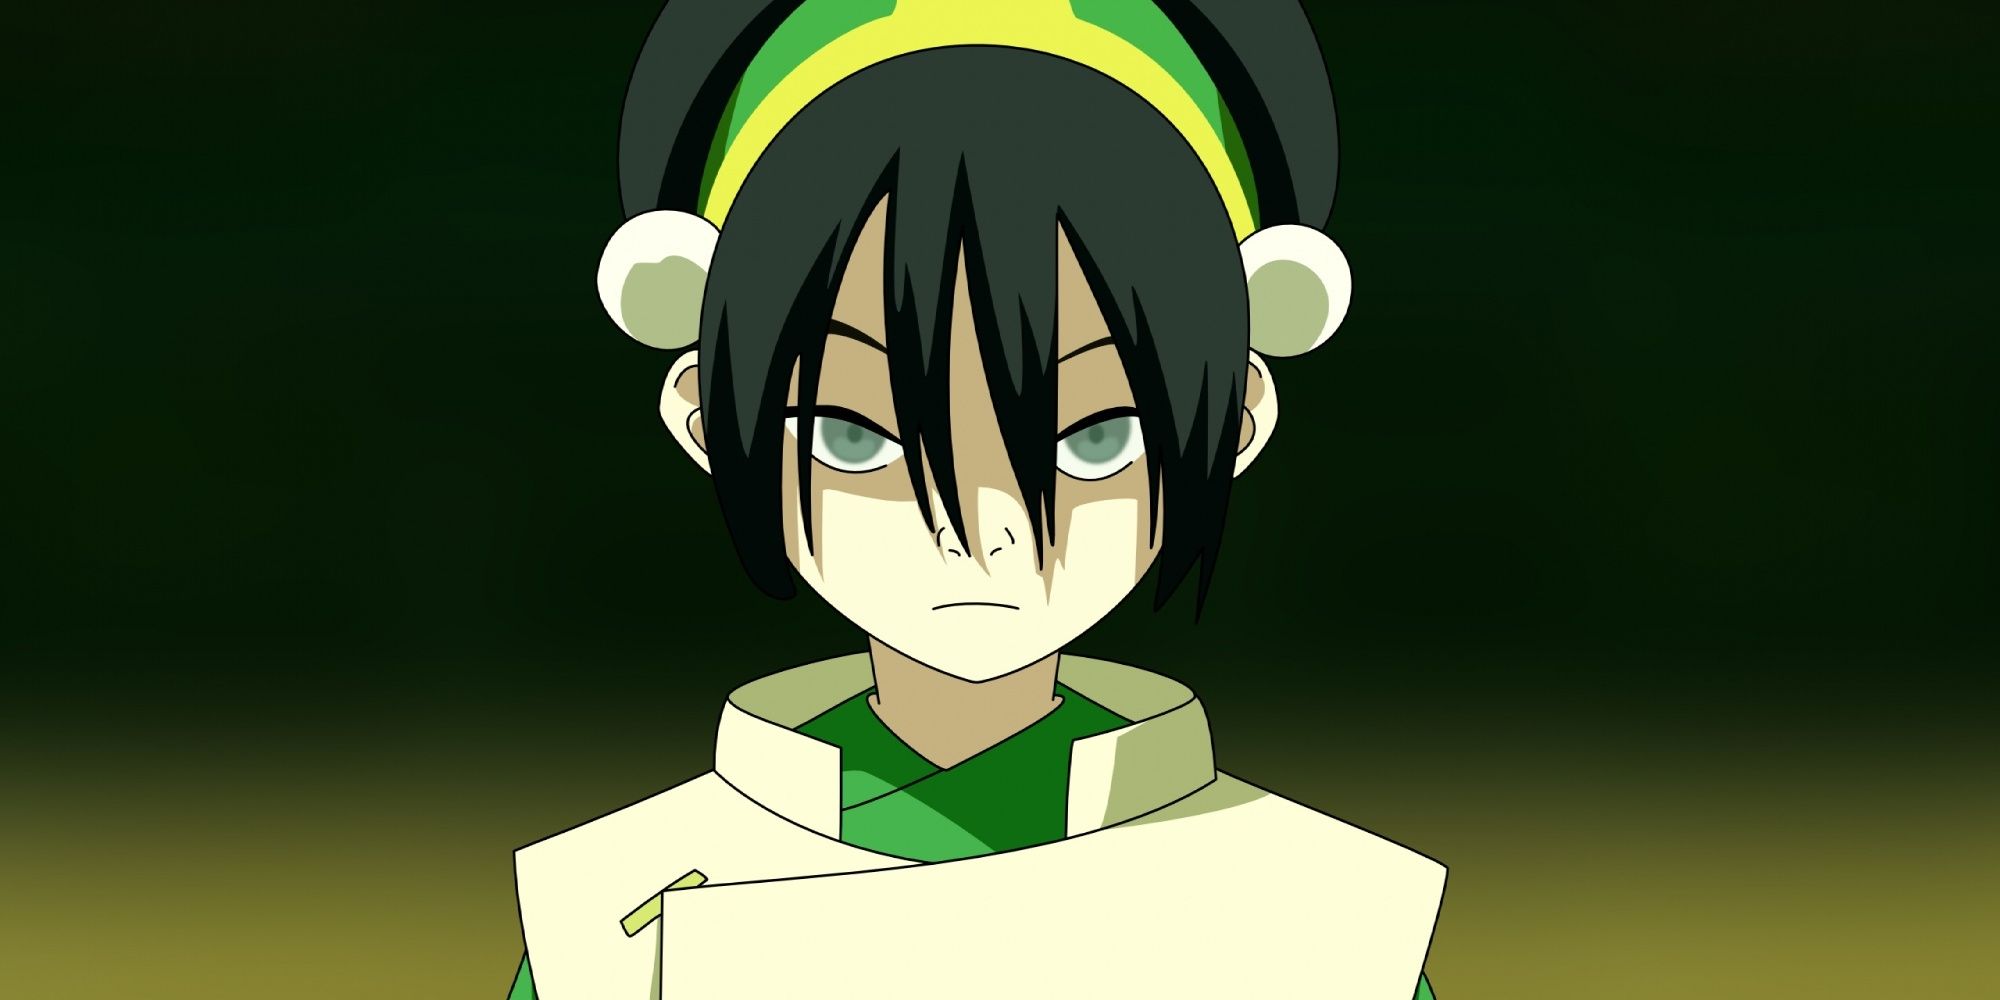 Toph looking serious in Avatar the Last Airbender